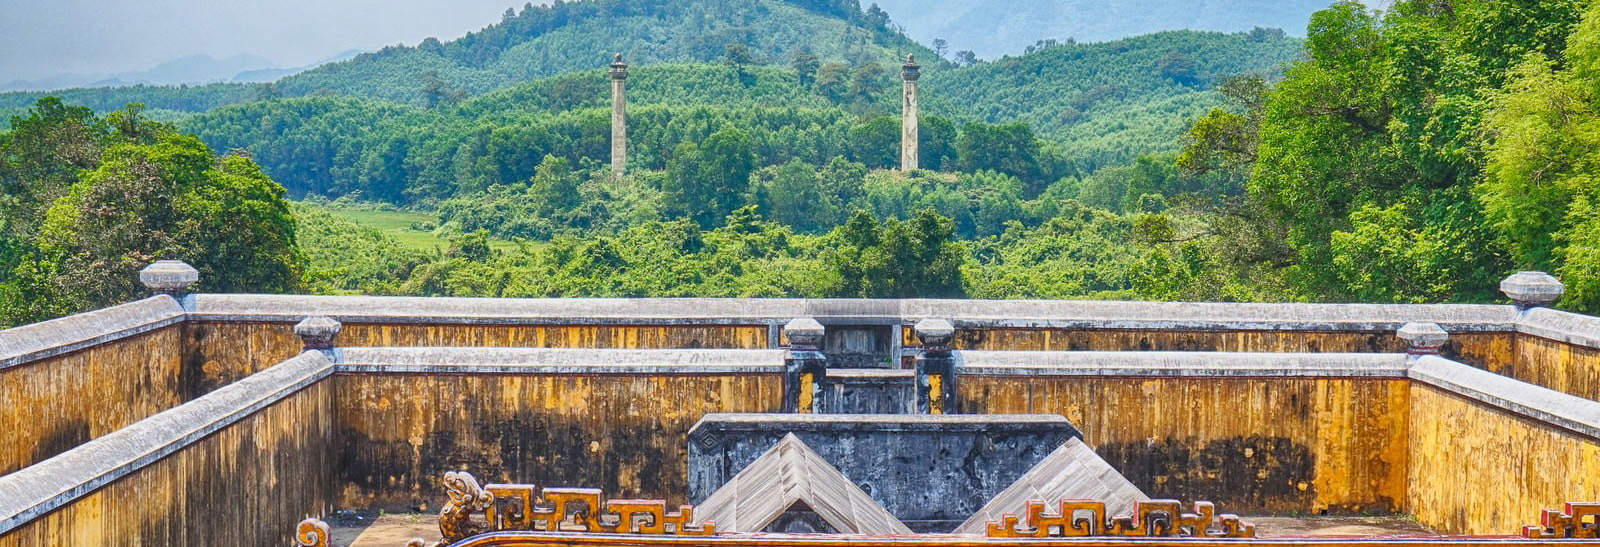 Travel Guide to Tomb Of Gia Long (Thien Tho Lang) in Hue